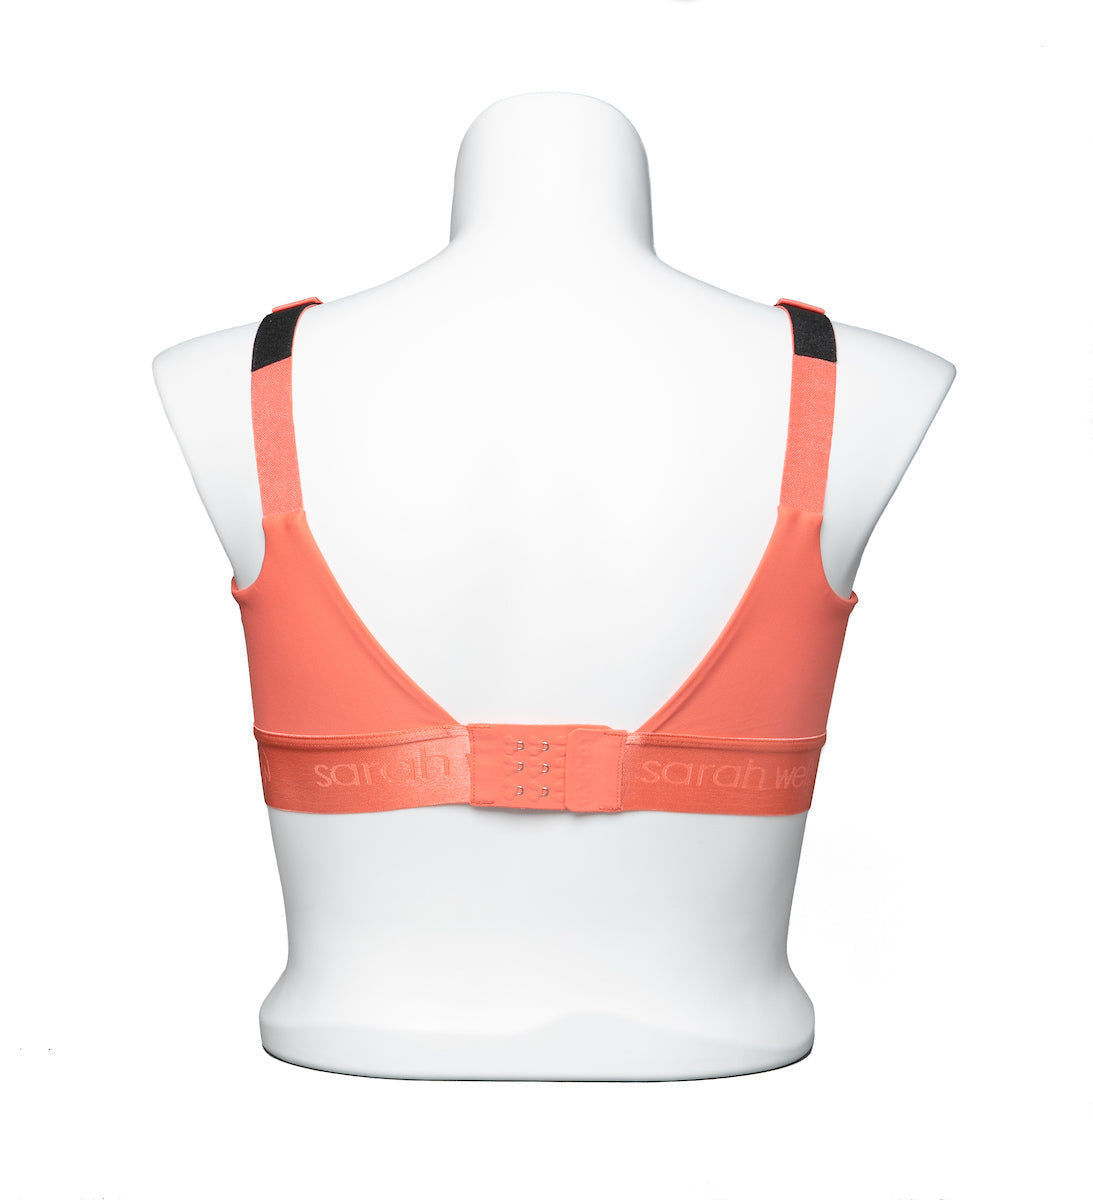 Simplicity Hands – Free Pumping Bra Kit with Extra Strap – Orange